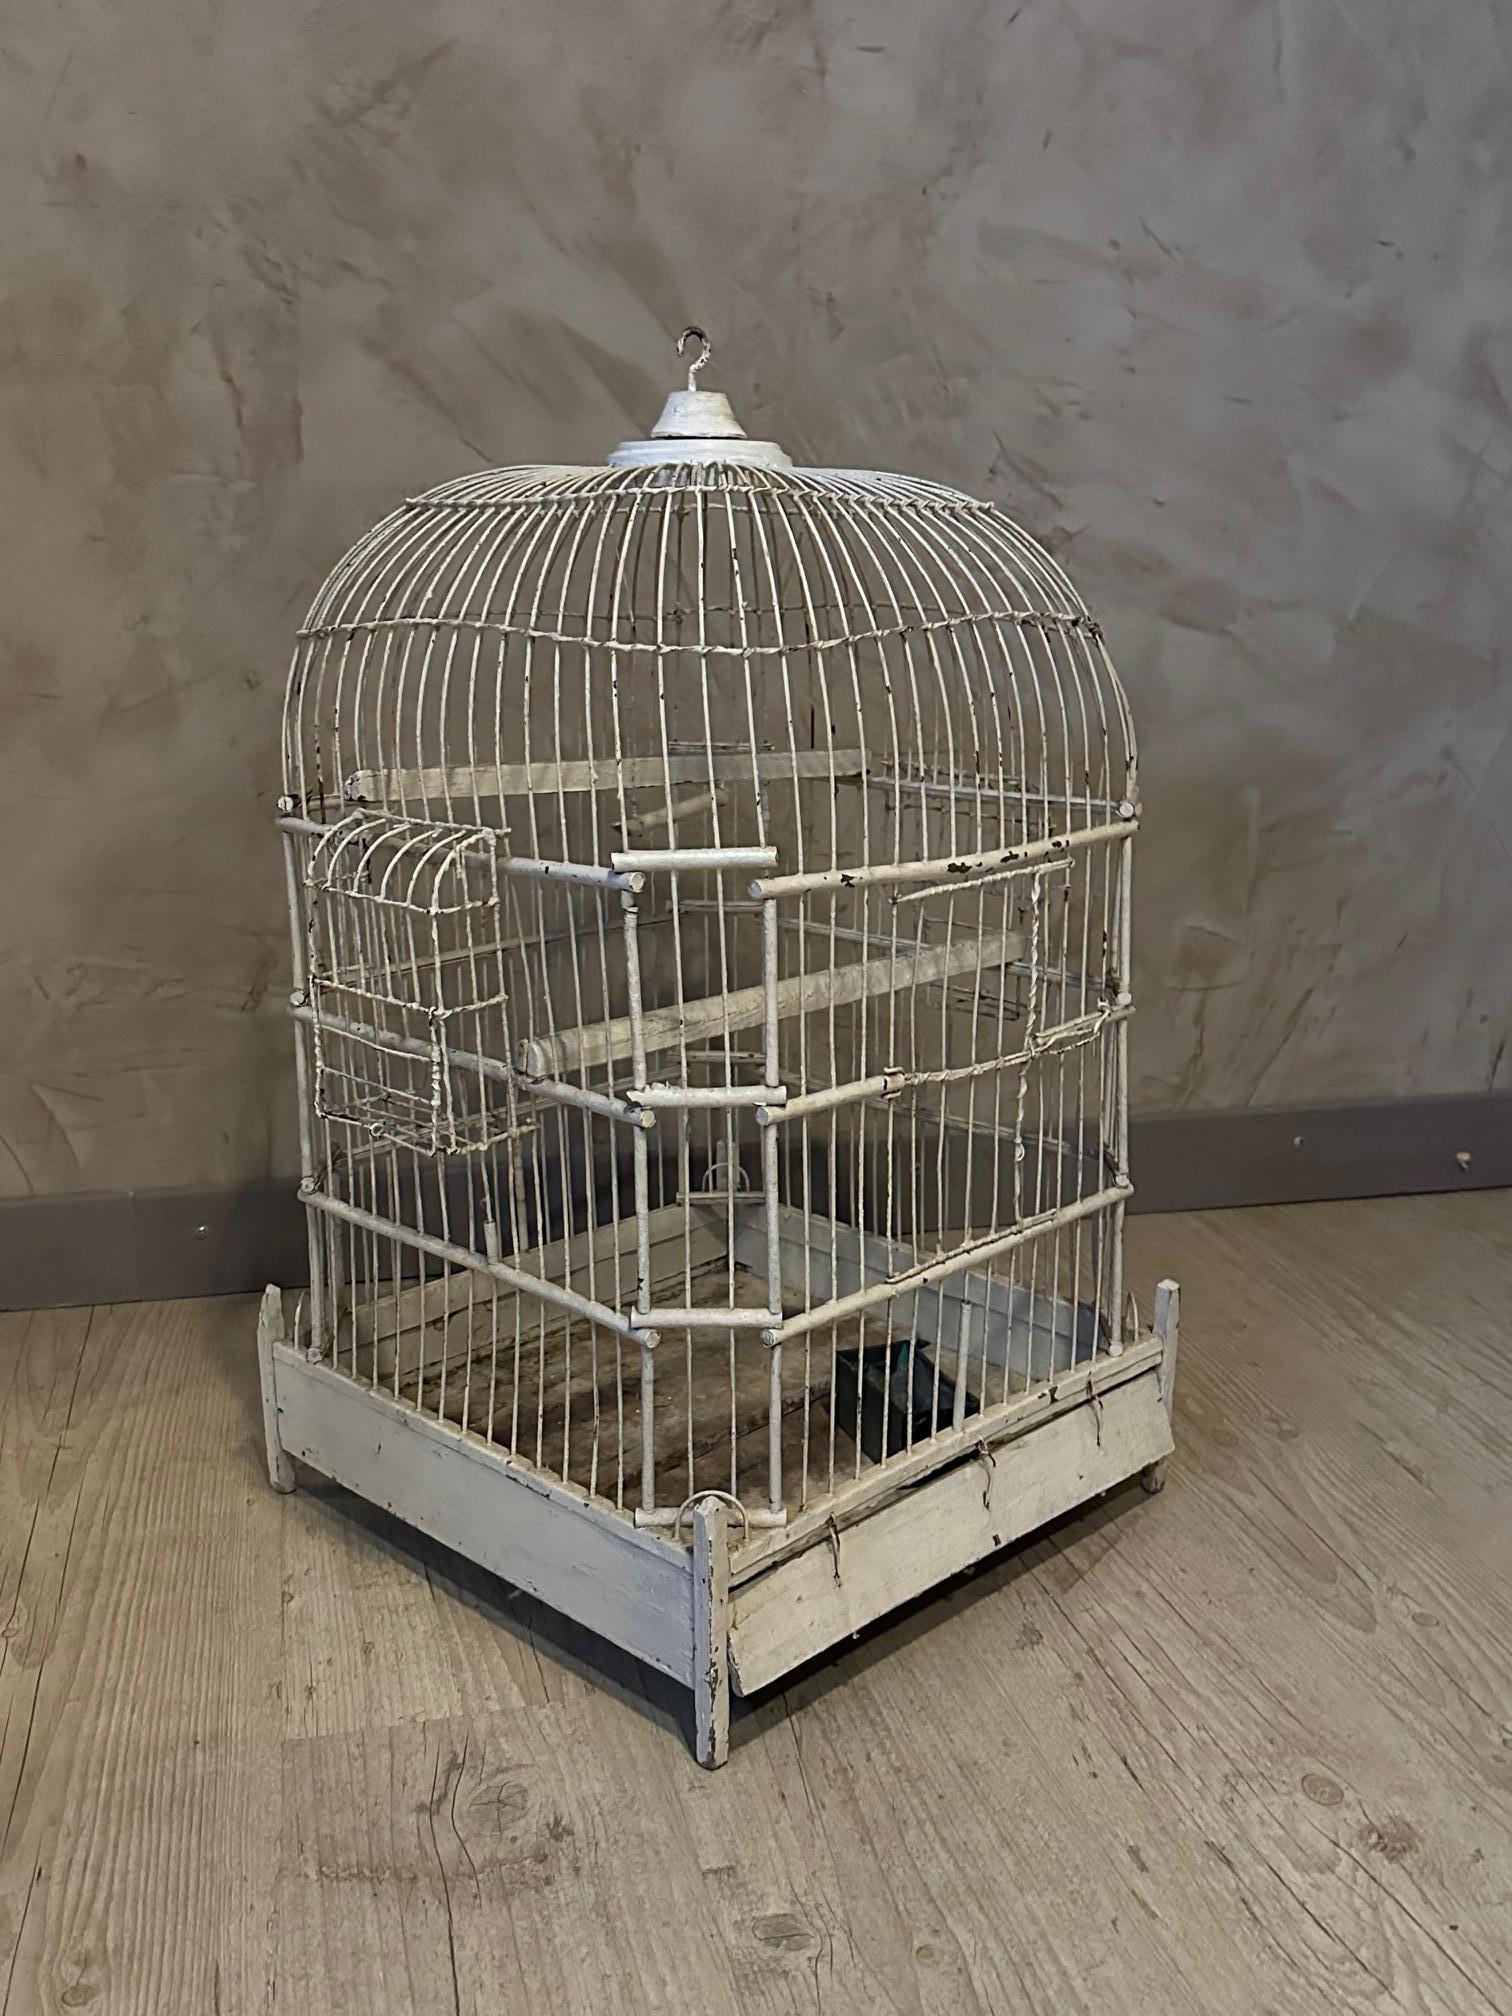 Beautiful bird cage dating from the 1920s in metal and wood painted white.
Pivot door. Feeder and perch.